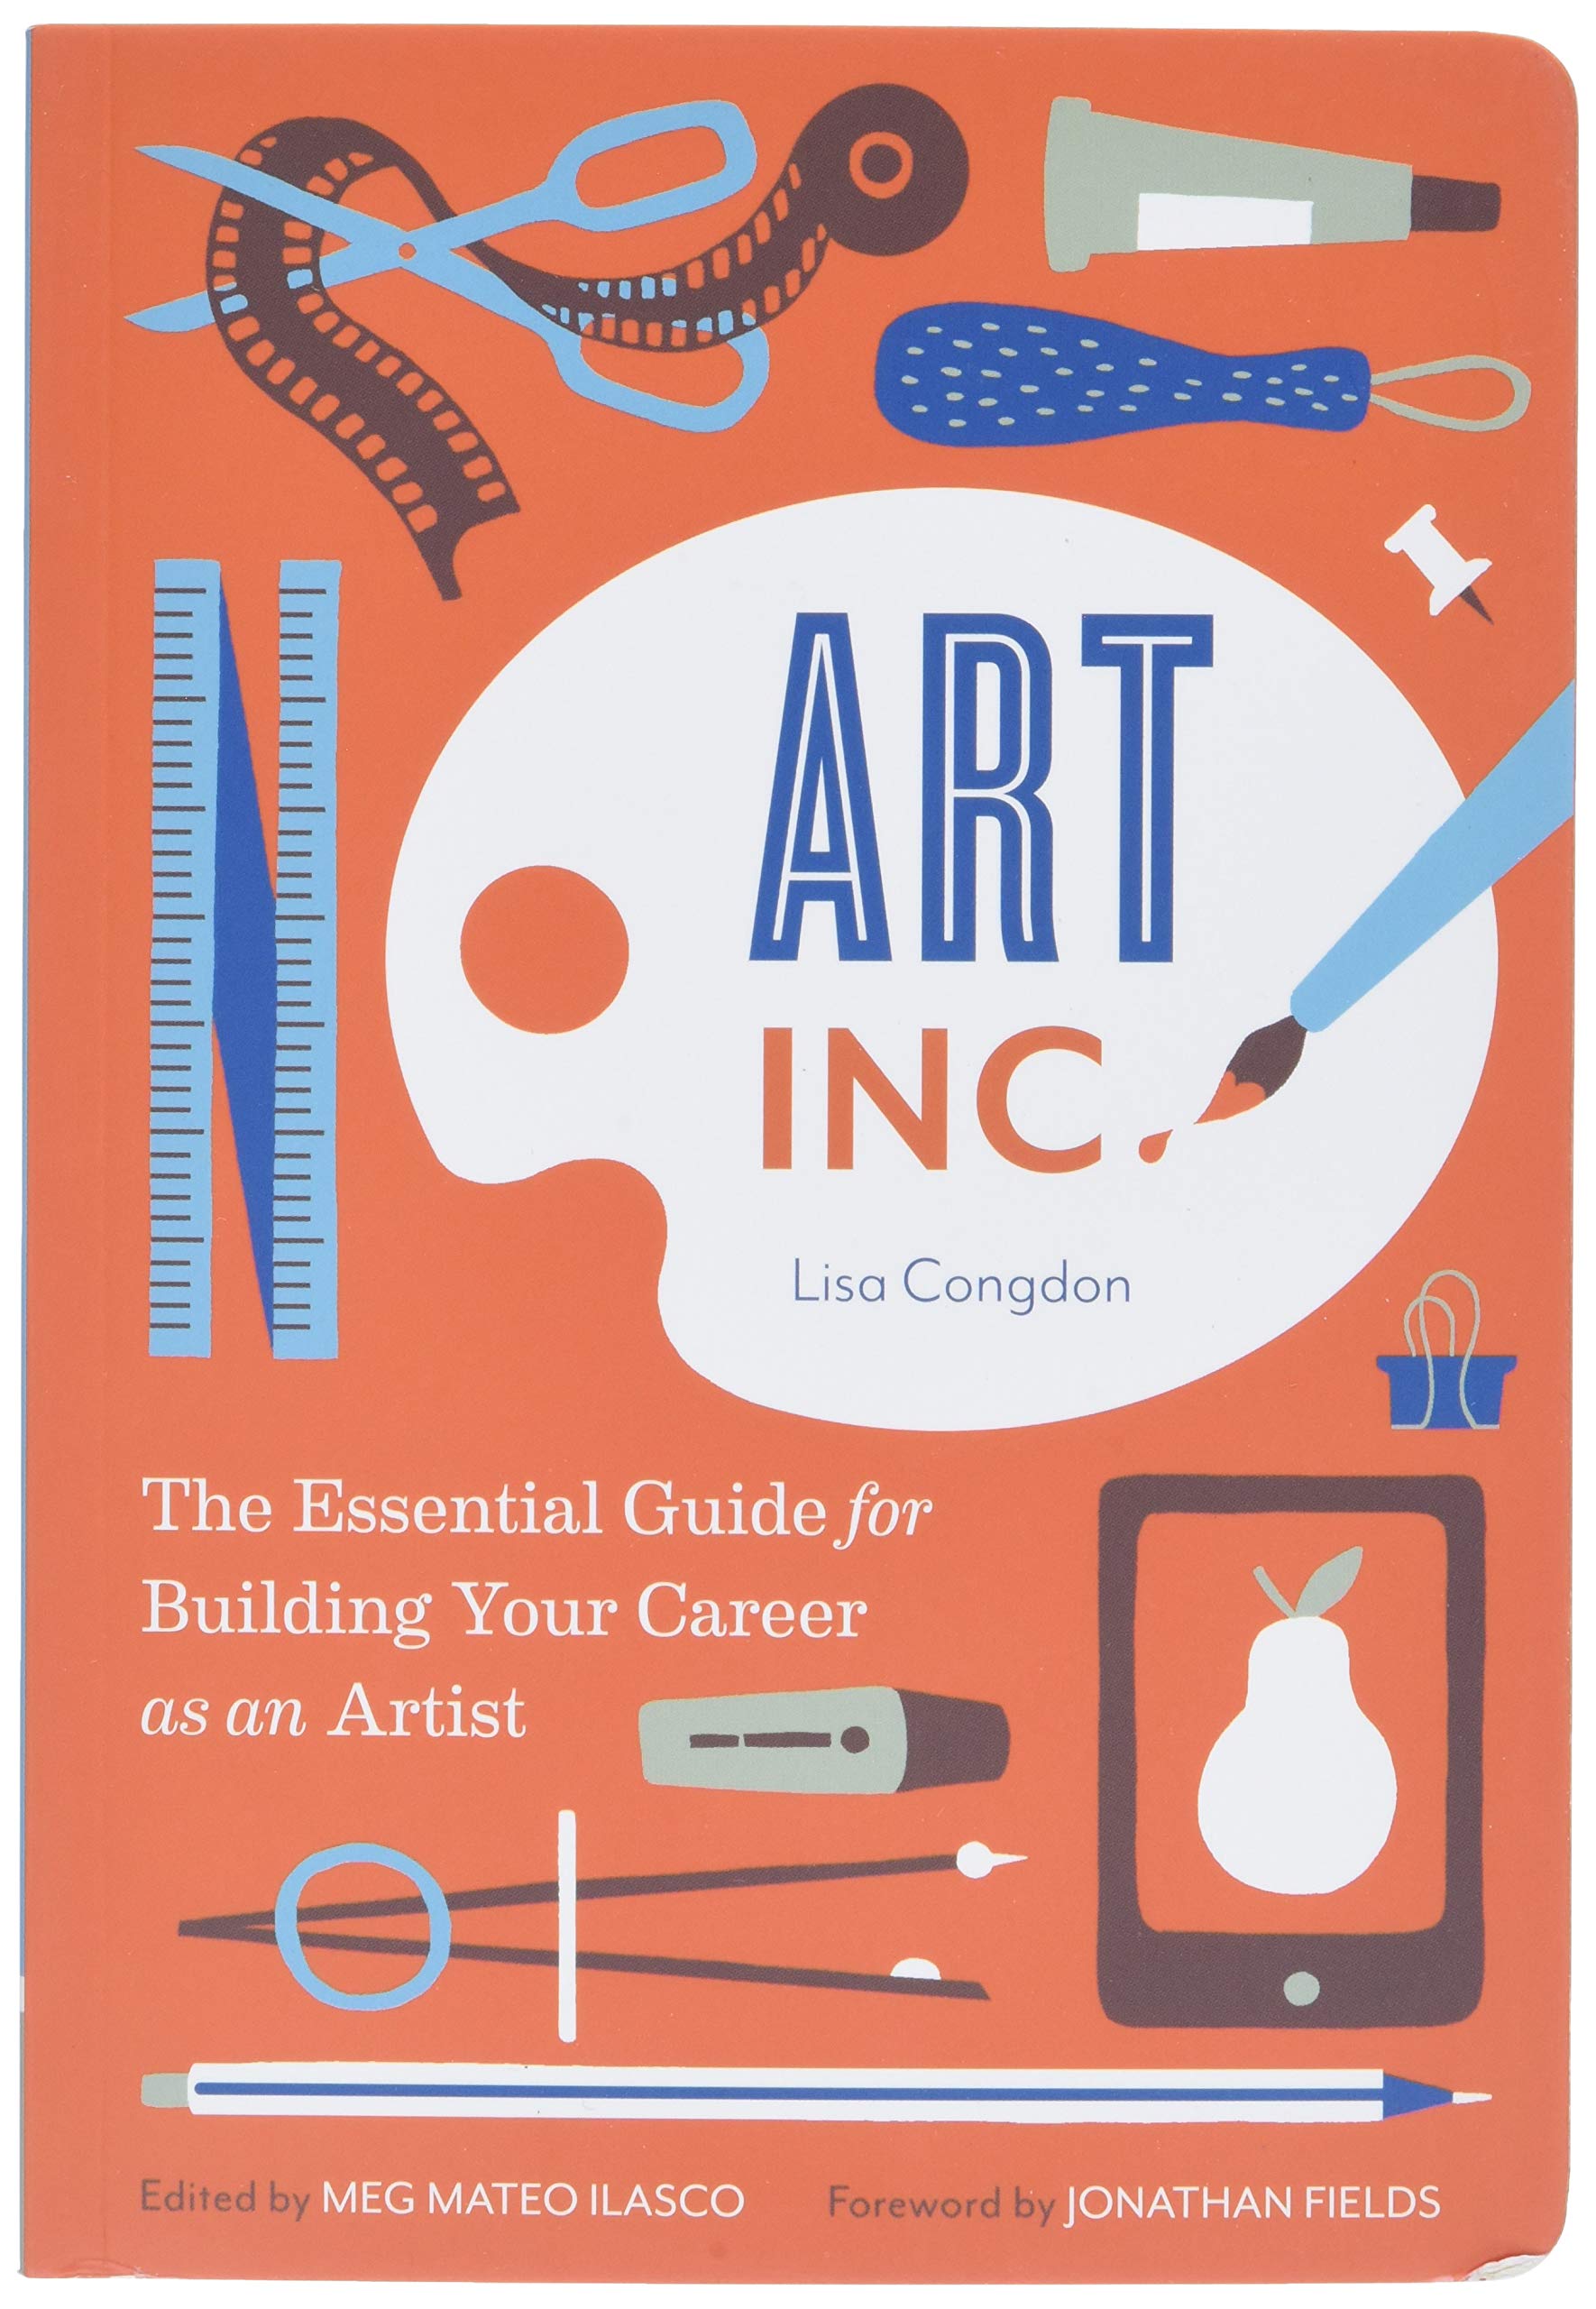 Ilasco M., Congdon L. - Art Inc. : The Essential Guide for Building Your Career as an Artist